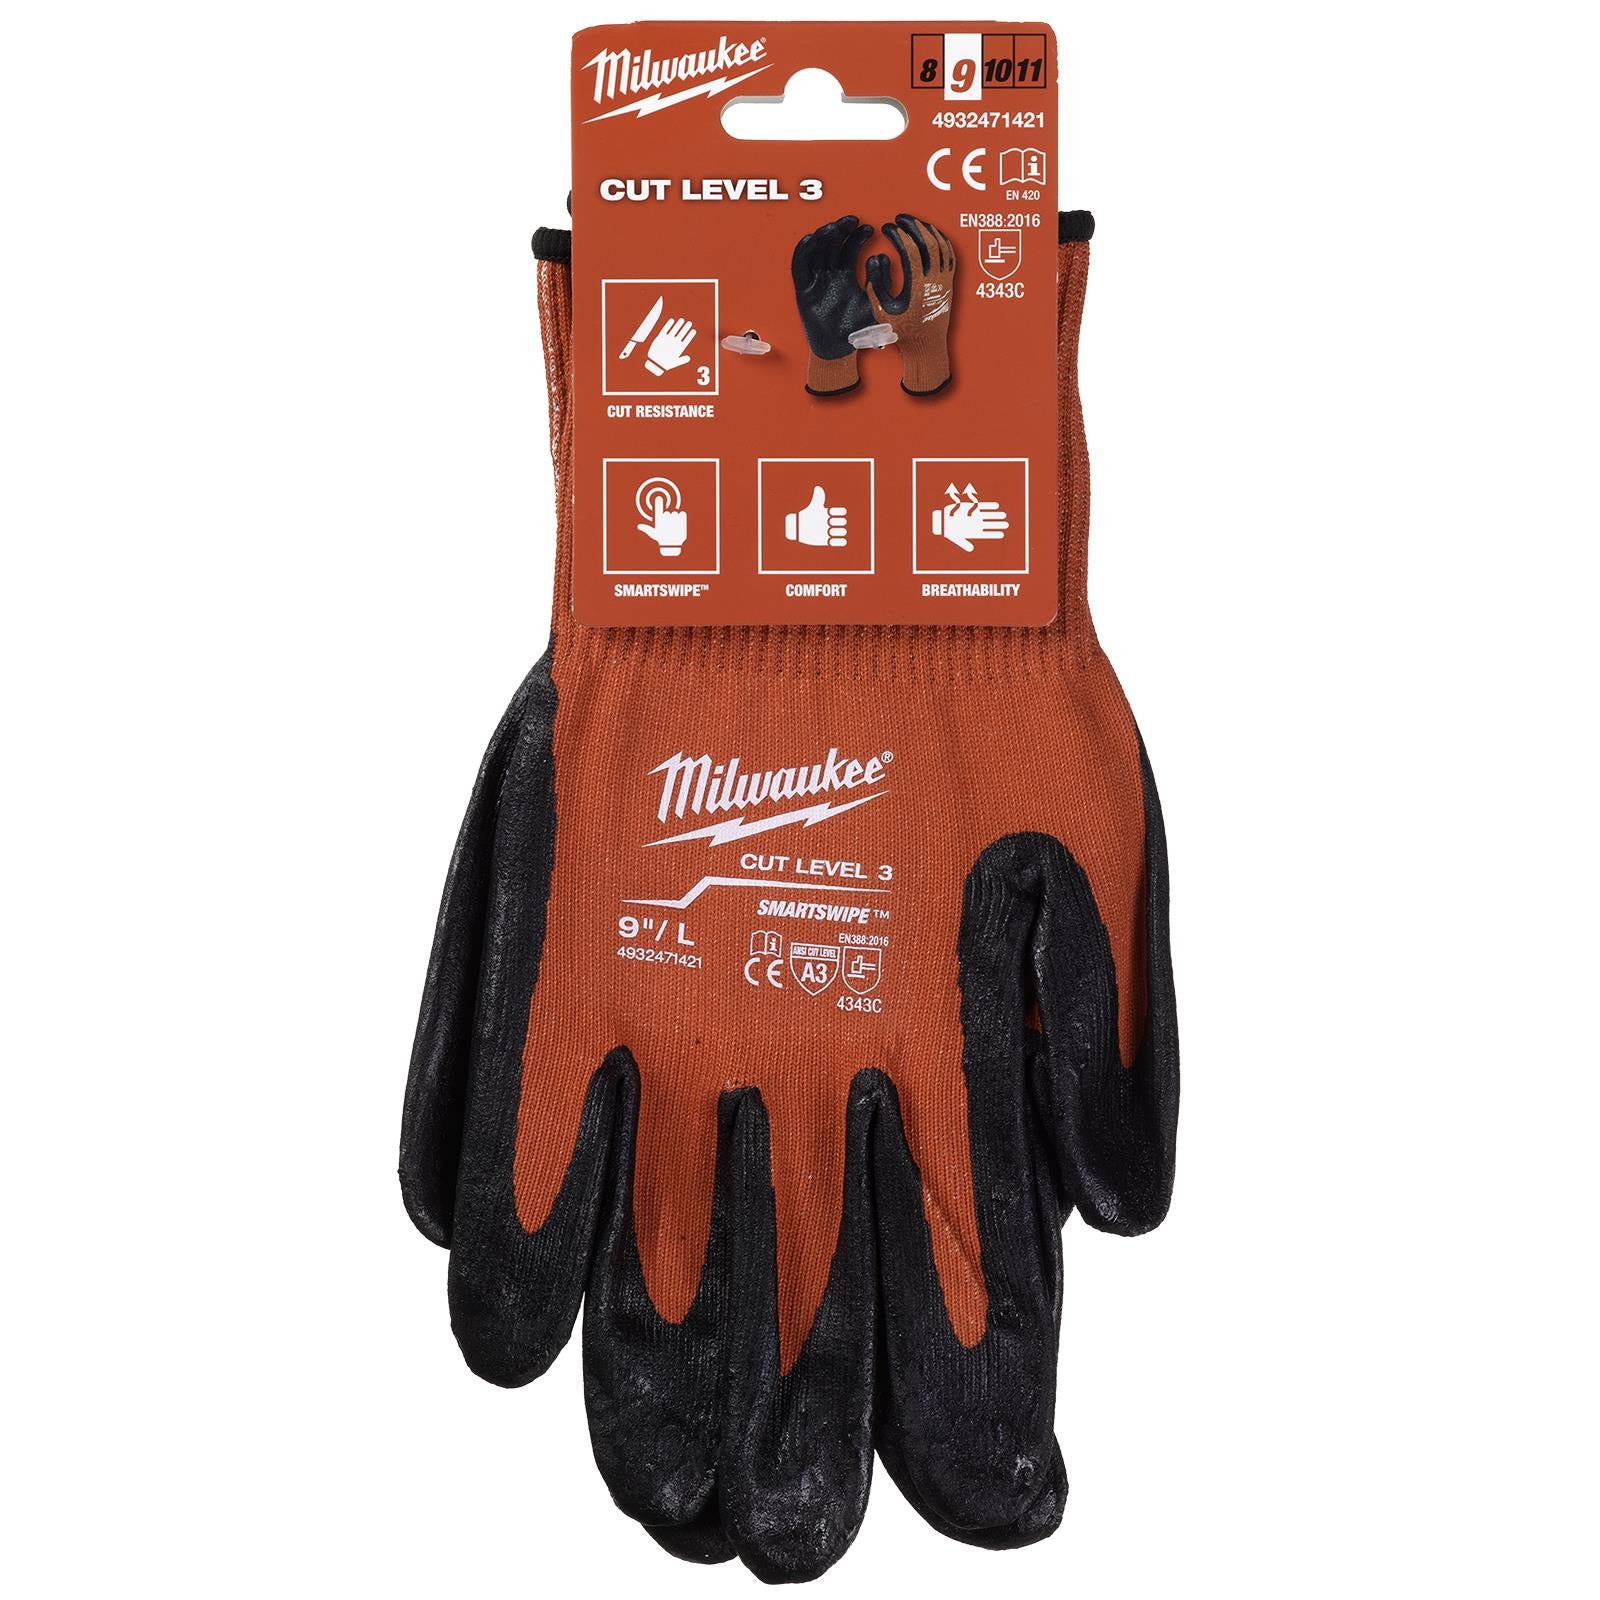 Milwaukee Safety Gloves Cut Level 3/C Dipped Glove Size 11 / XXL Extra Extra Large